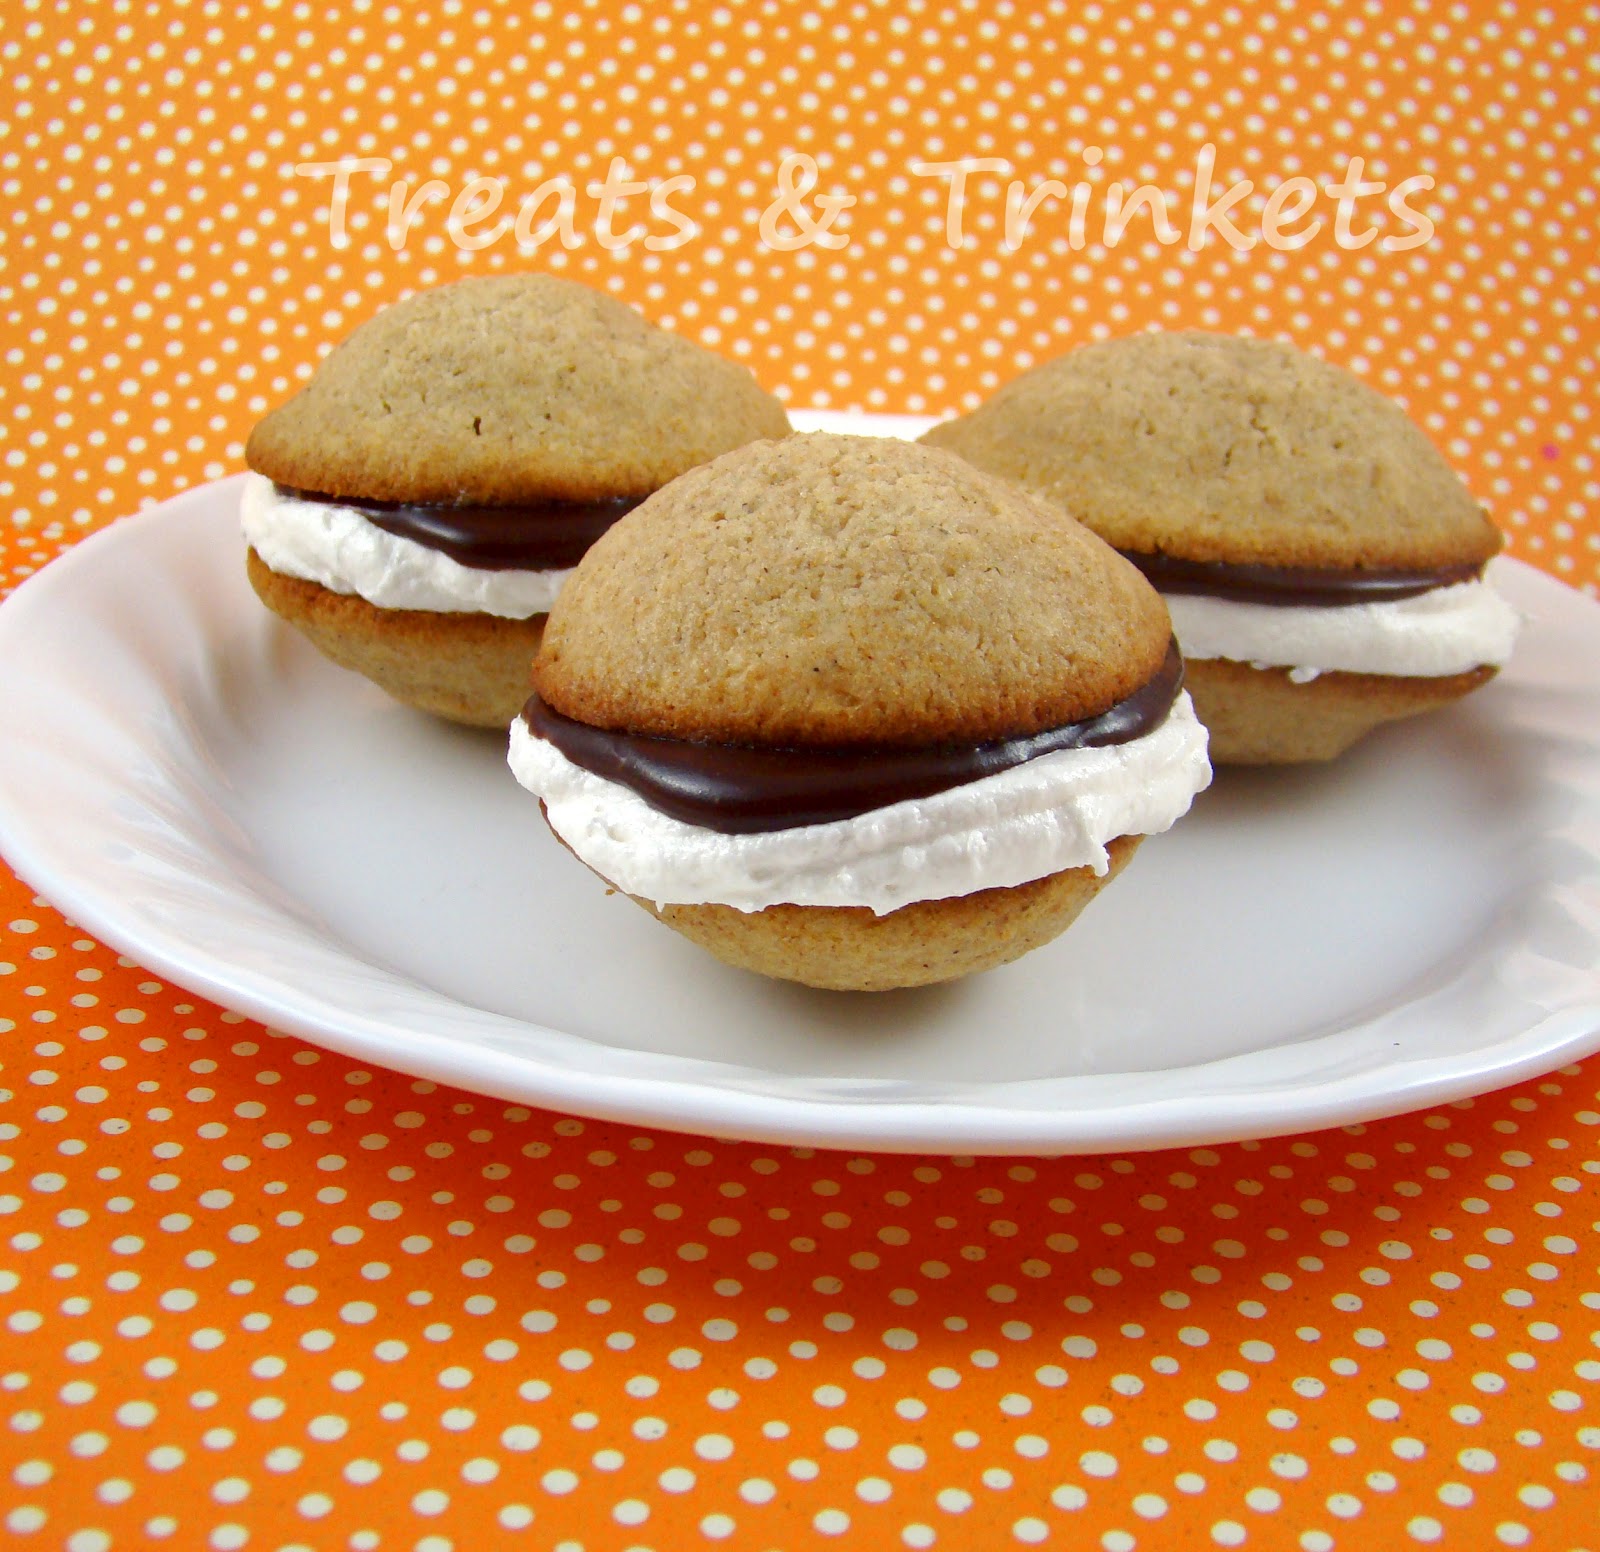 Treats &amp; Trinkets: Sunday S&amp;#39;mores: S&amp;#39;mores Whoopie Pies